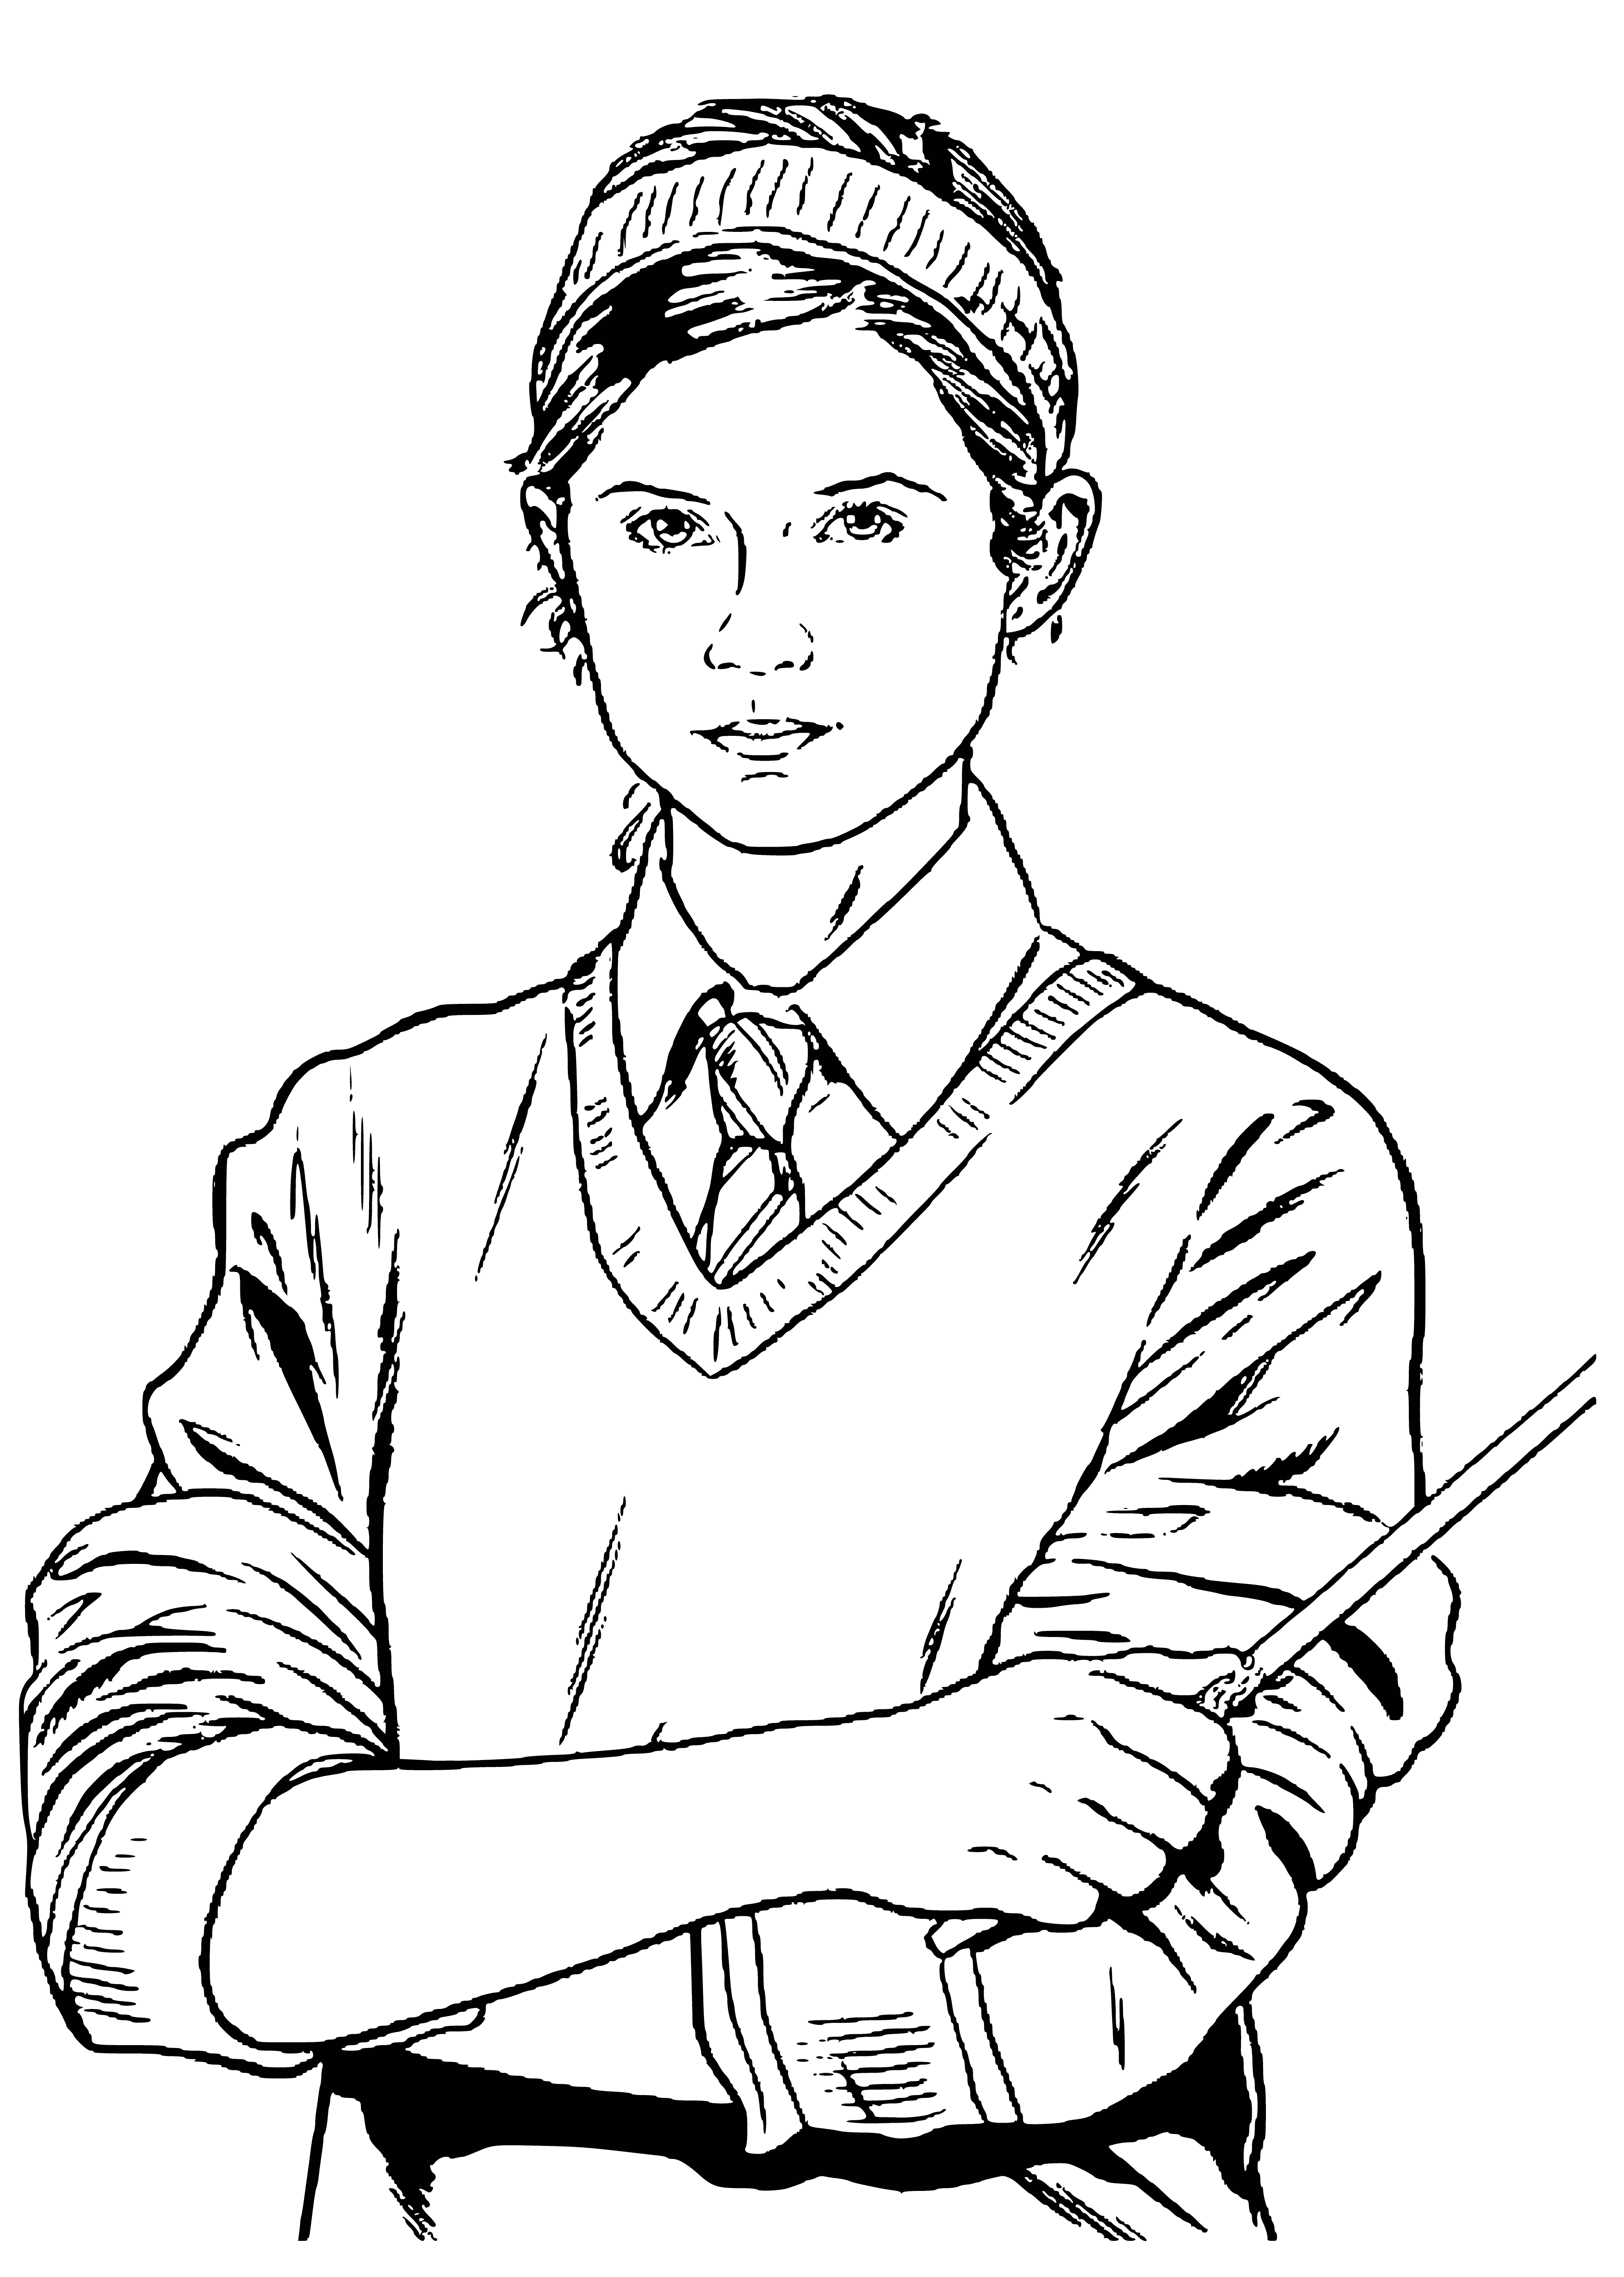 coloring page: Harry & Ginny look lovingly at each other. She holds a wand and wears a light blue robe; he wears black & gold. His hair is black & messy; her hair is red in a ponytail. #Hogwarts